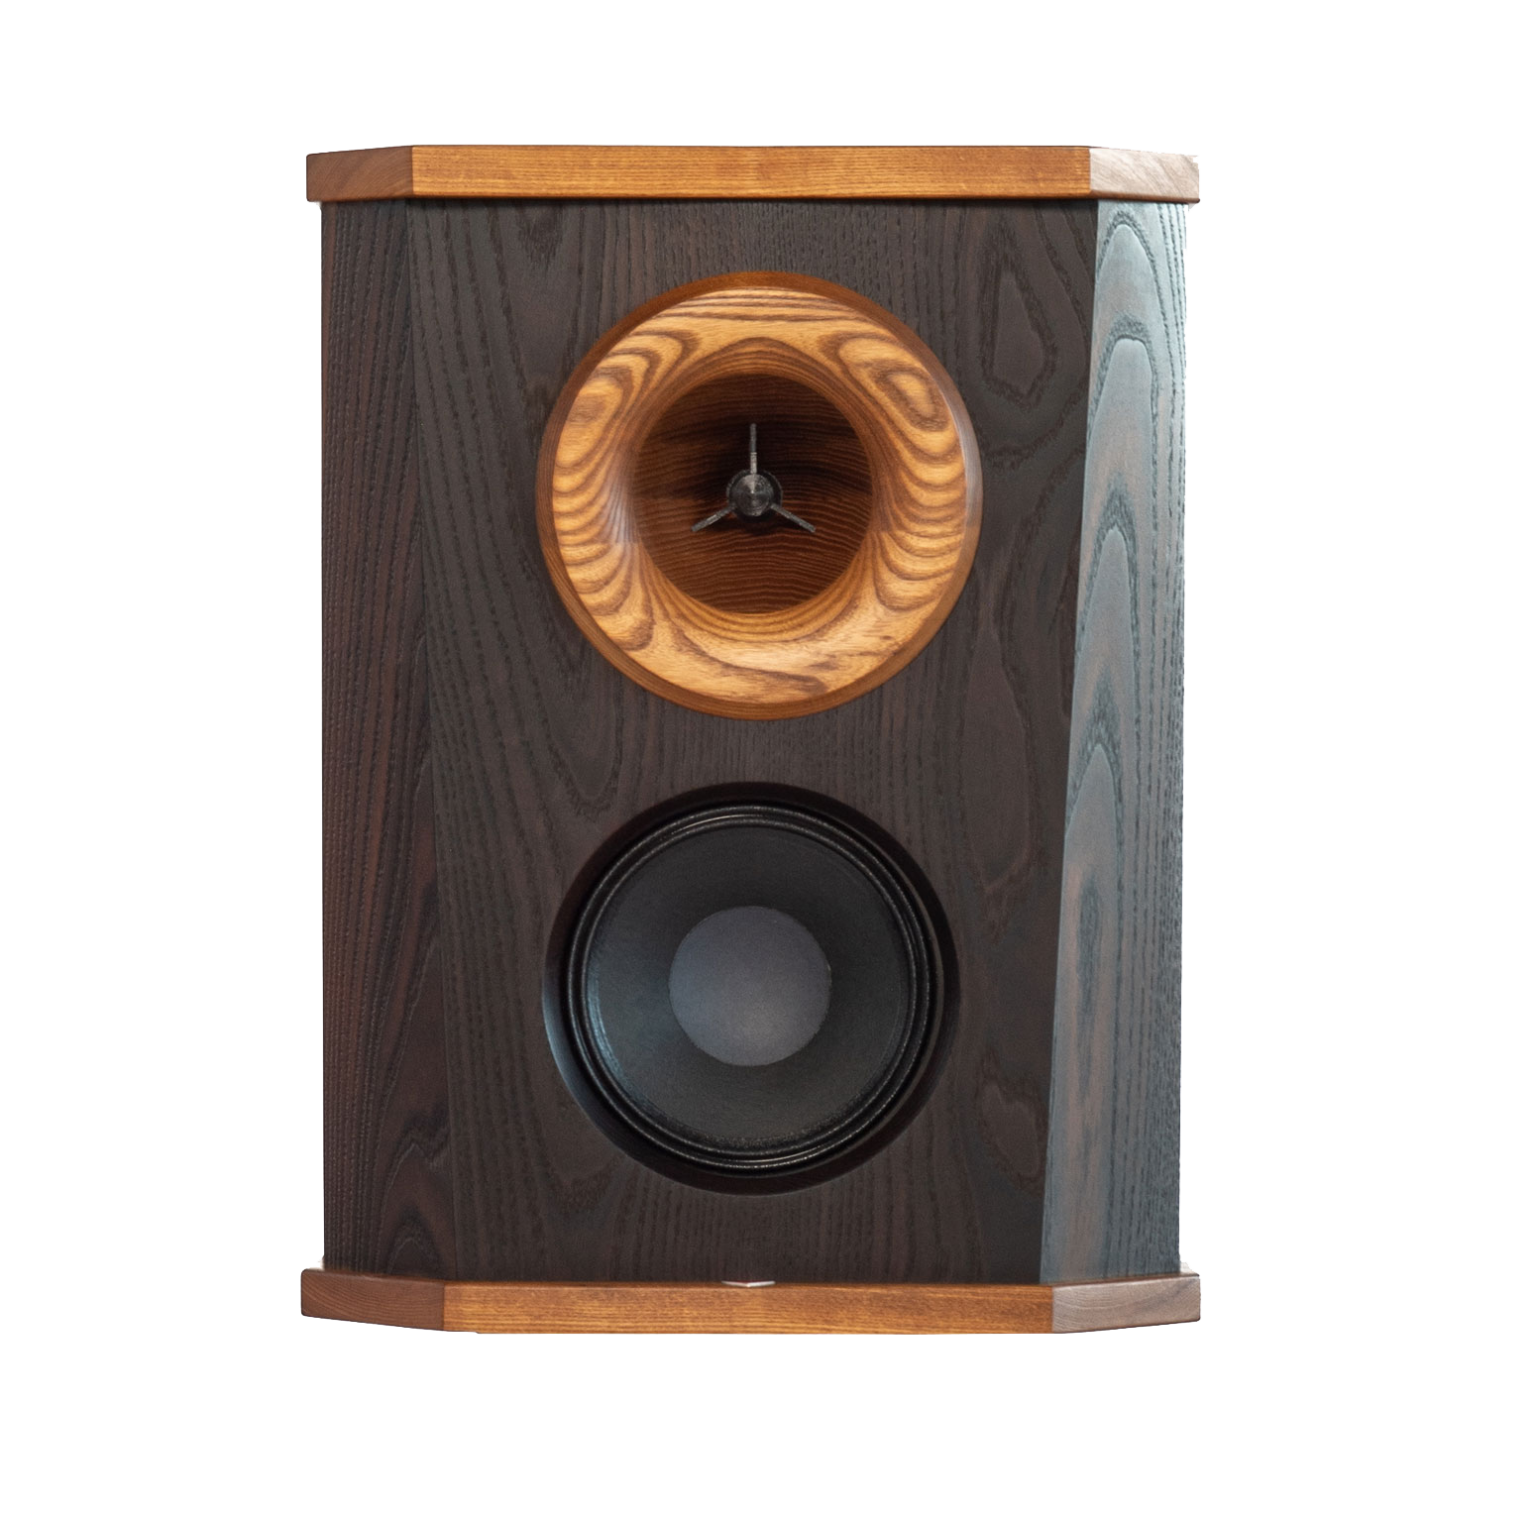 The DeVille SQ (Superior Quality) is the ultimate DeVille. The entire enclosure is made out of solid Pennsylvania ash, either natural (light color) or torrefied (roasted) in either light, medium or dark. The phase plug is cast from a 3D printed sand mold in solid bronze, then patinated, polished and lacquered. Internal wiring is solid silver, and the crossover components are the finest quality.